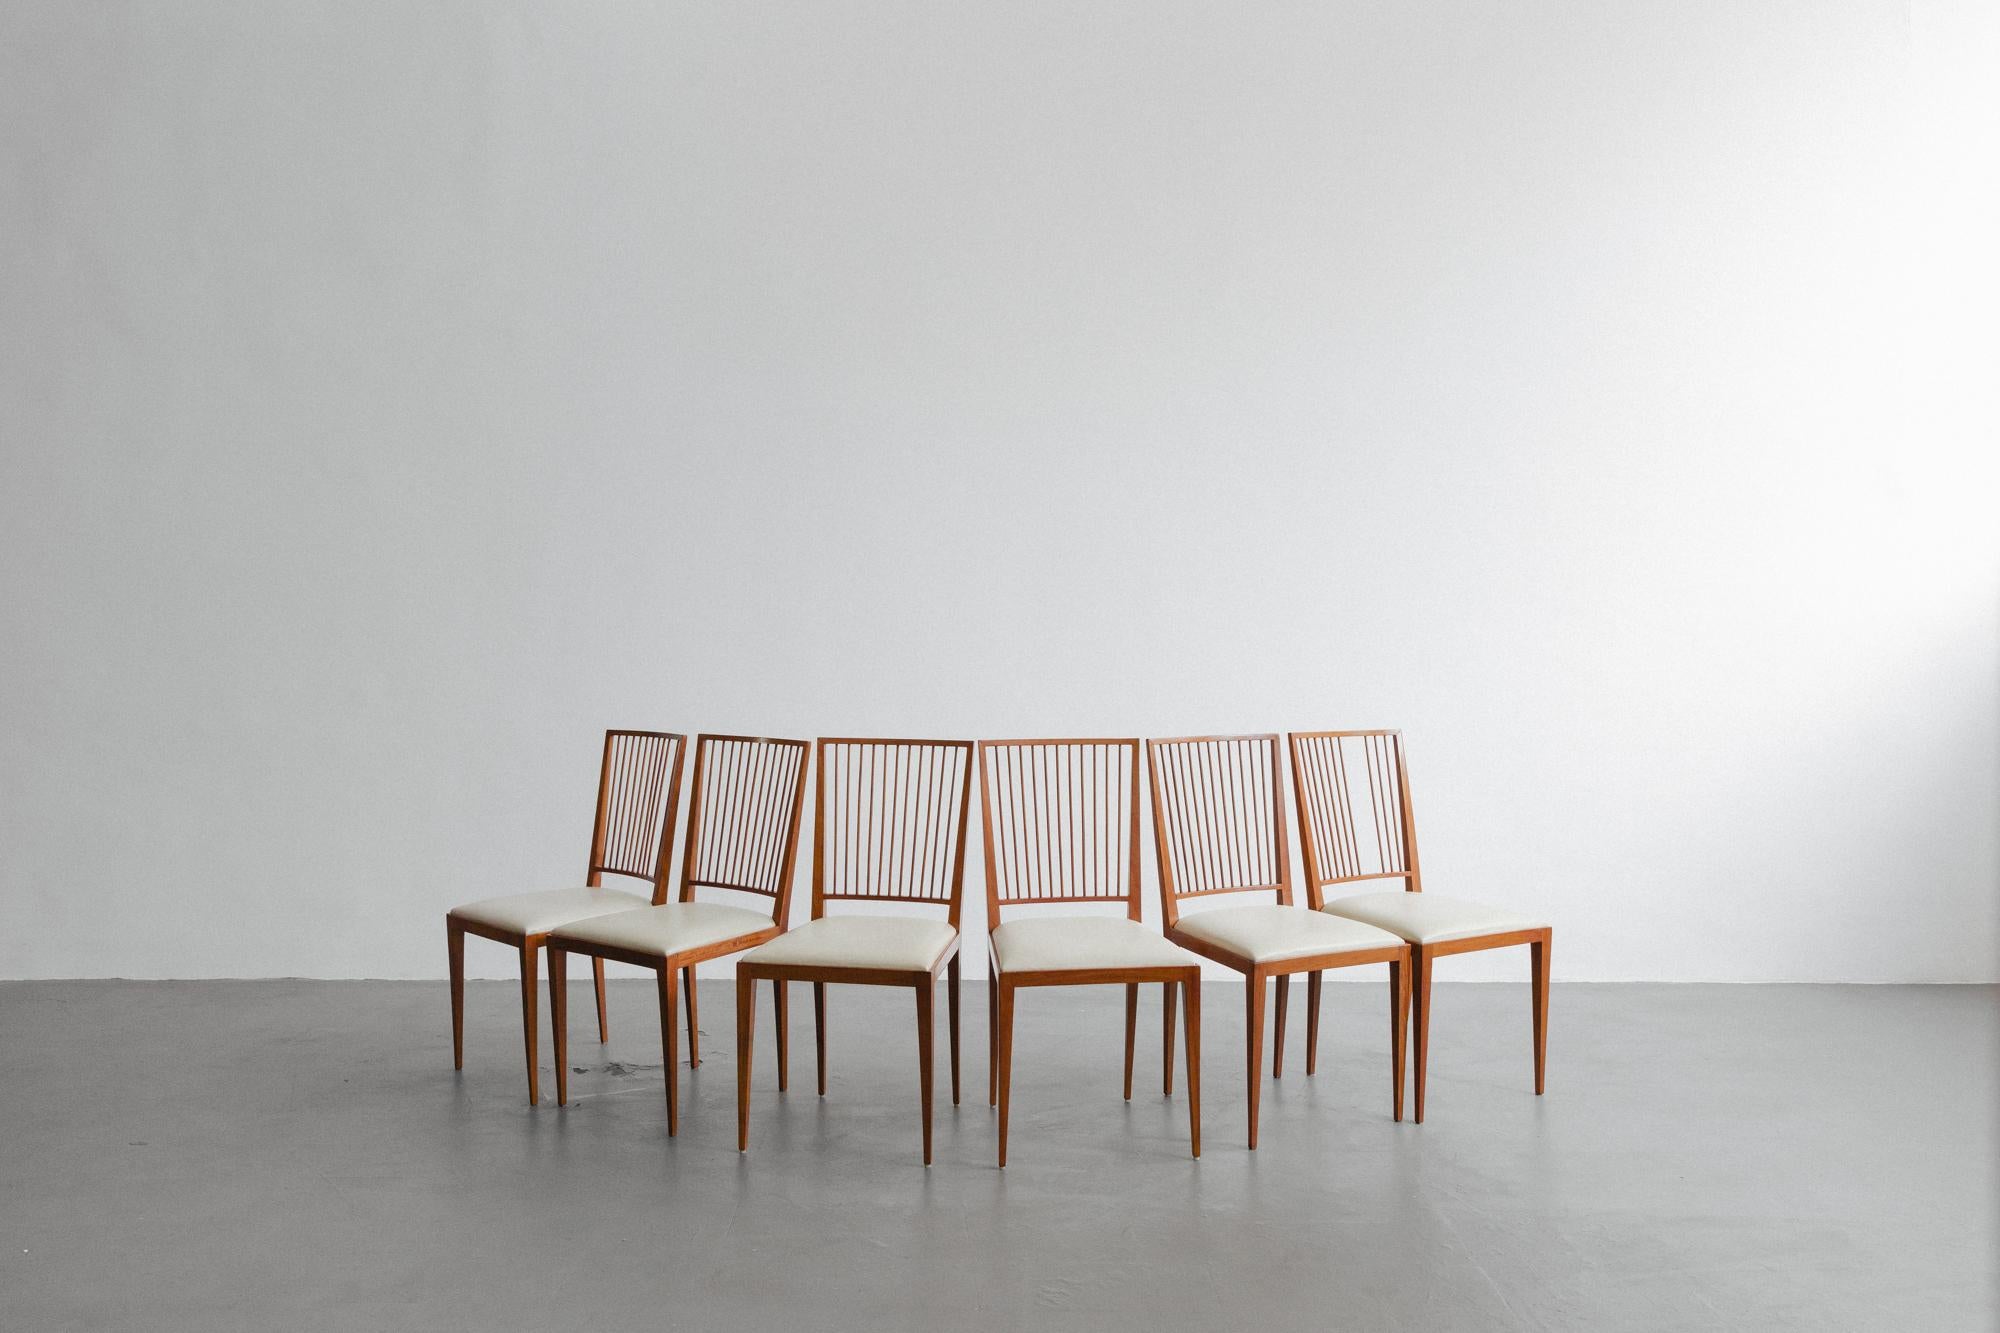 This exquisitely crafted chair made of Perobinha-do-campo Wood, designed by Joaquim Tenreiro (1906-1992), evokes a refined coexistence of traditional values and modern aesthetics. Its delicate shapes, with the backs of thin sticks and the carved,